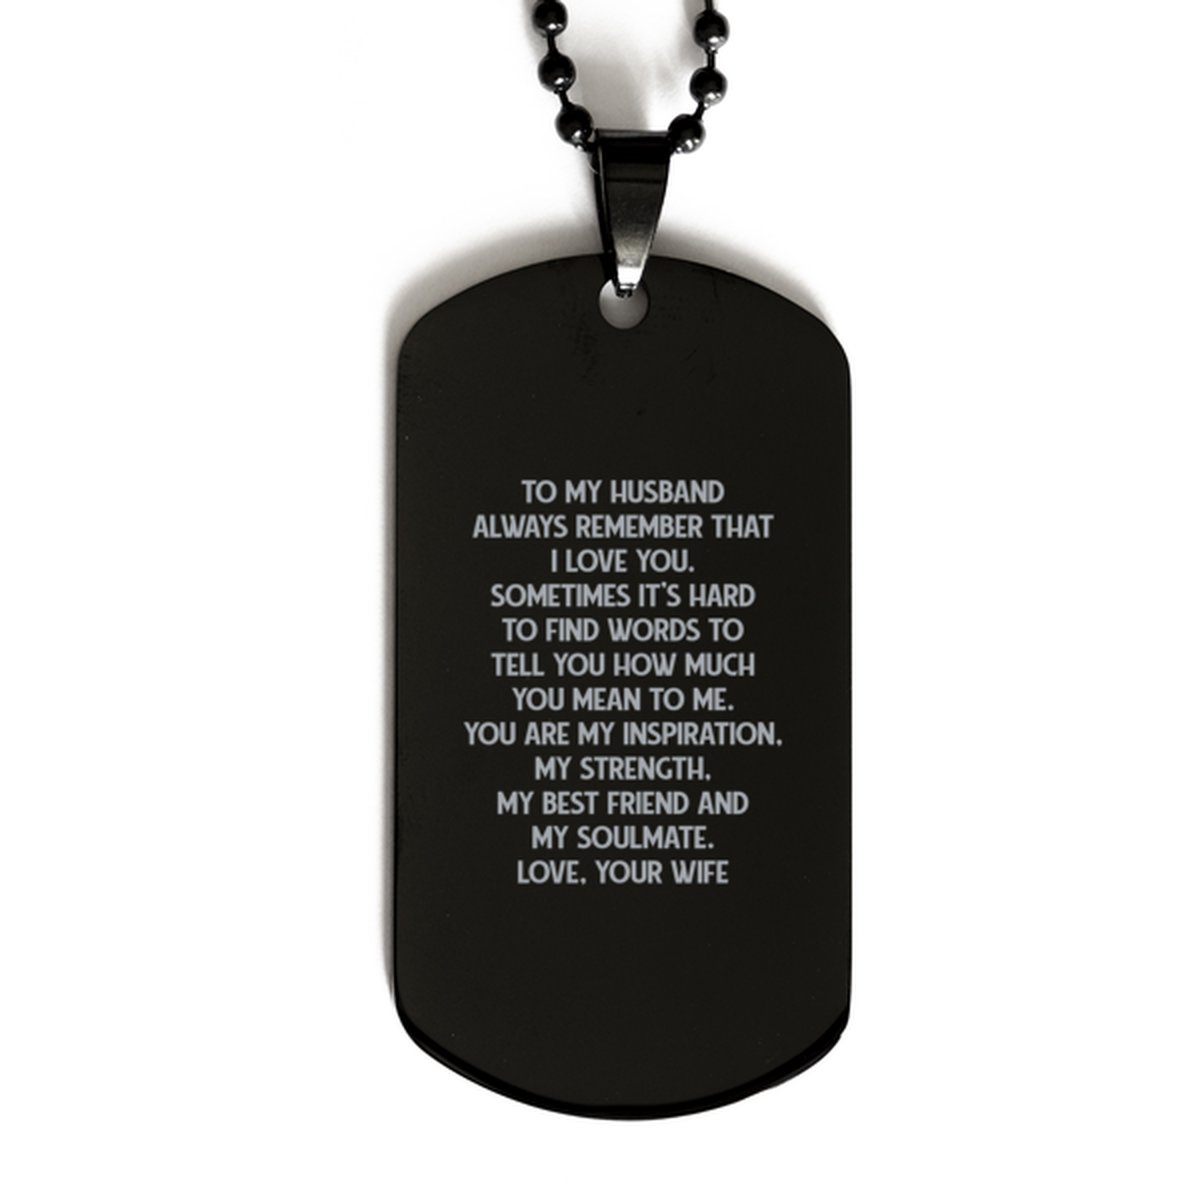 To My Husband Black Dog Tag, Always Remember That I Love You, Anniversary Gifts For Husband From Wife, Birthday Gifts For Men